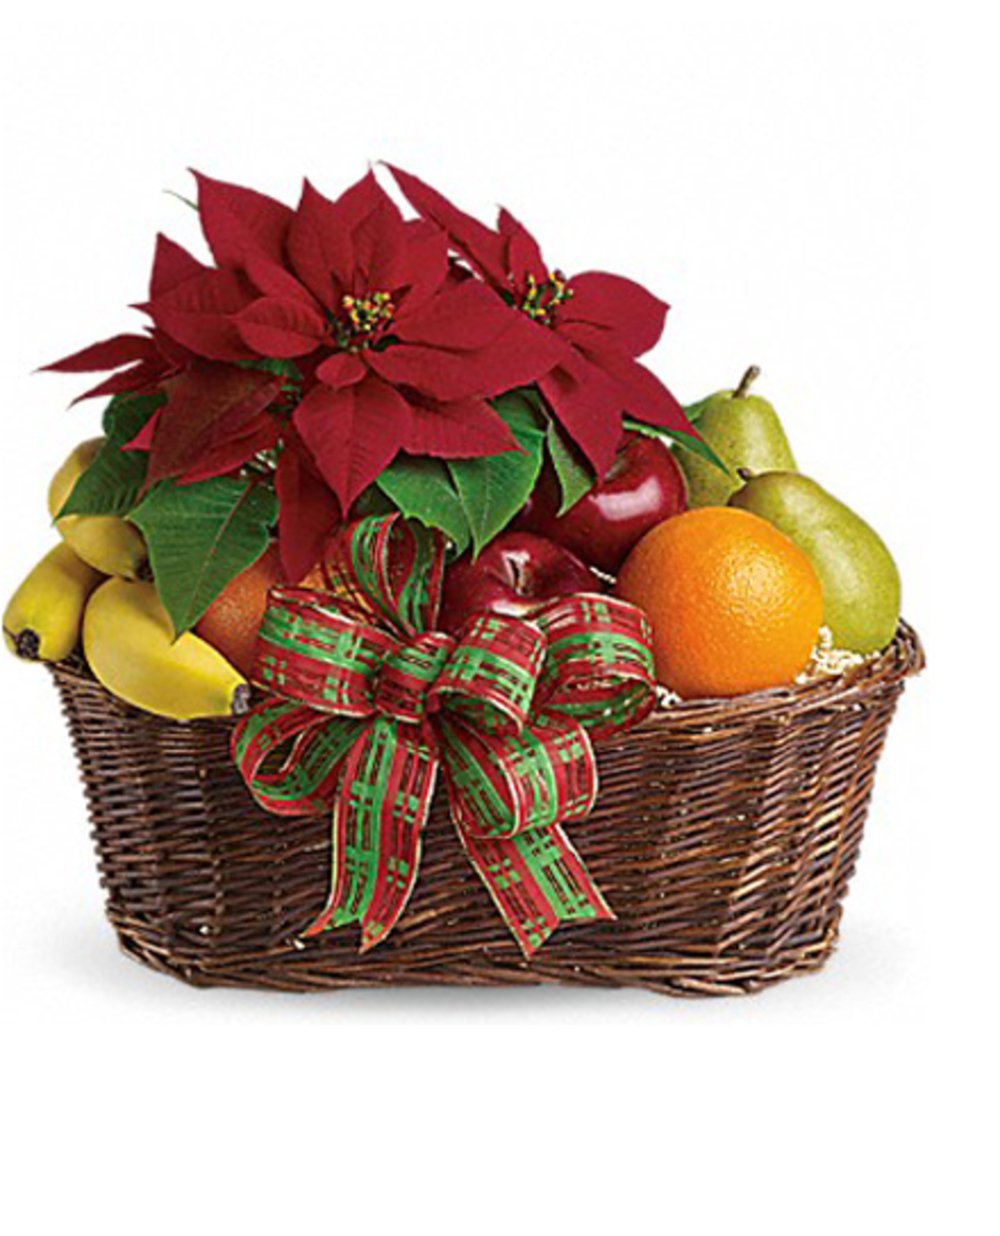 Fruit Basket With Flowers